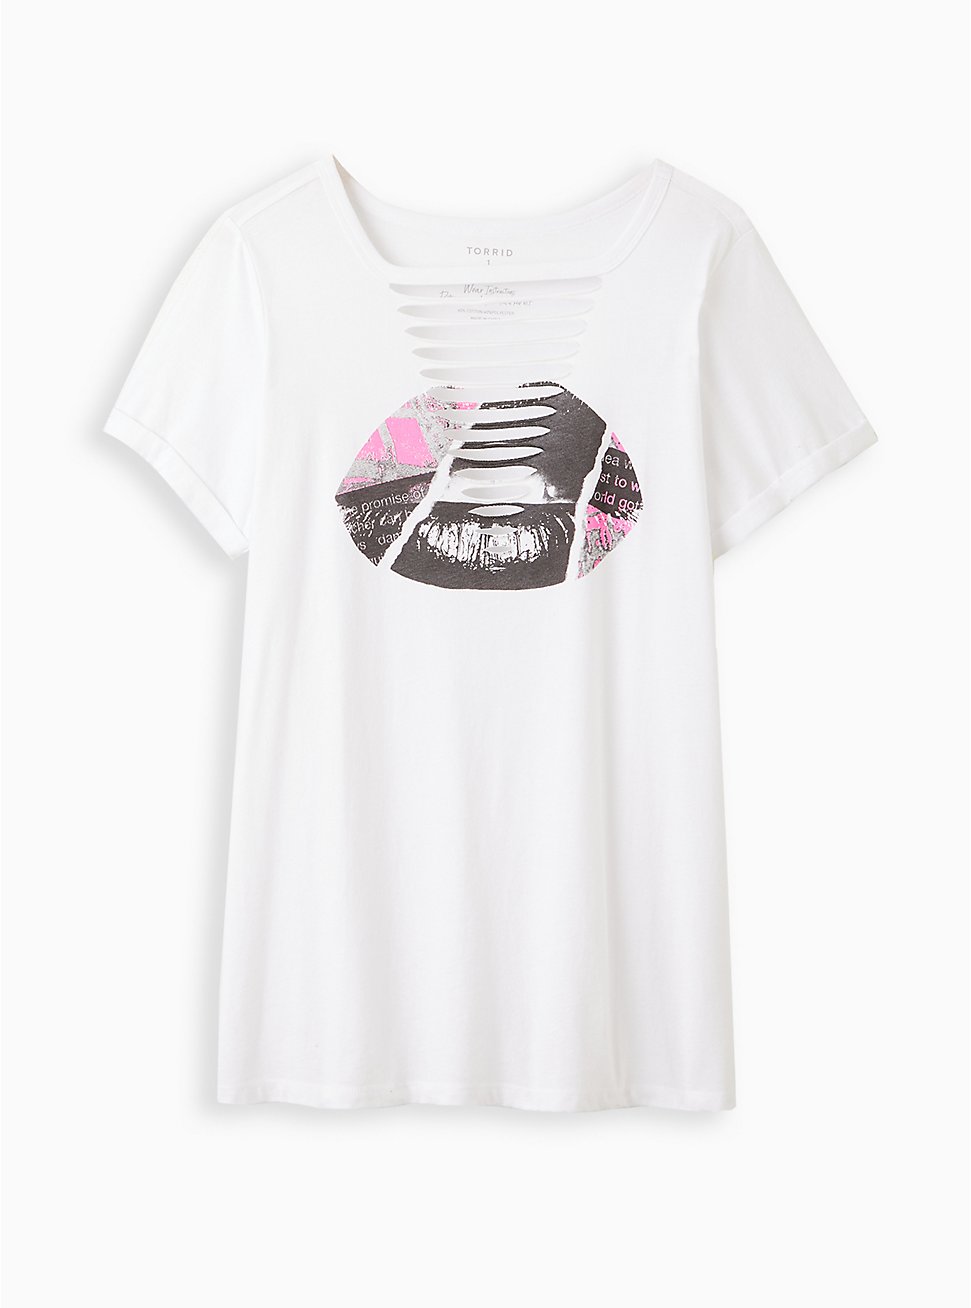 Plus Size Destructed Tee - Lips White, BRIGHT WHITE, hi-res